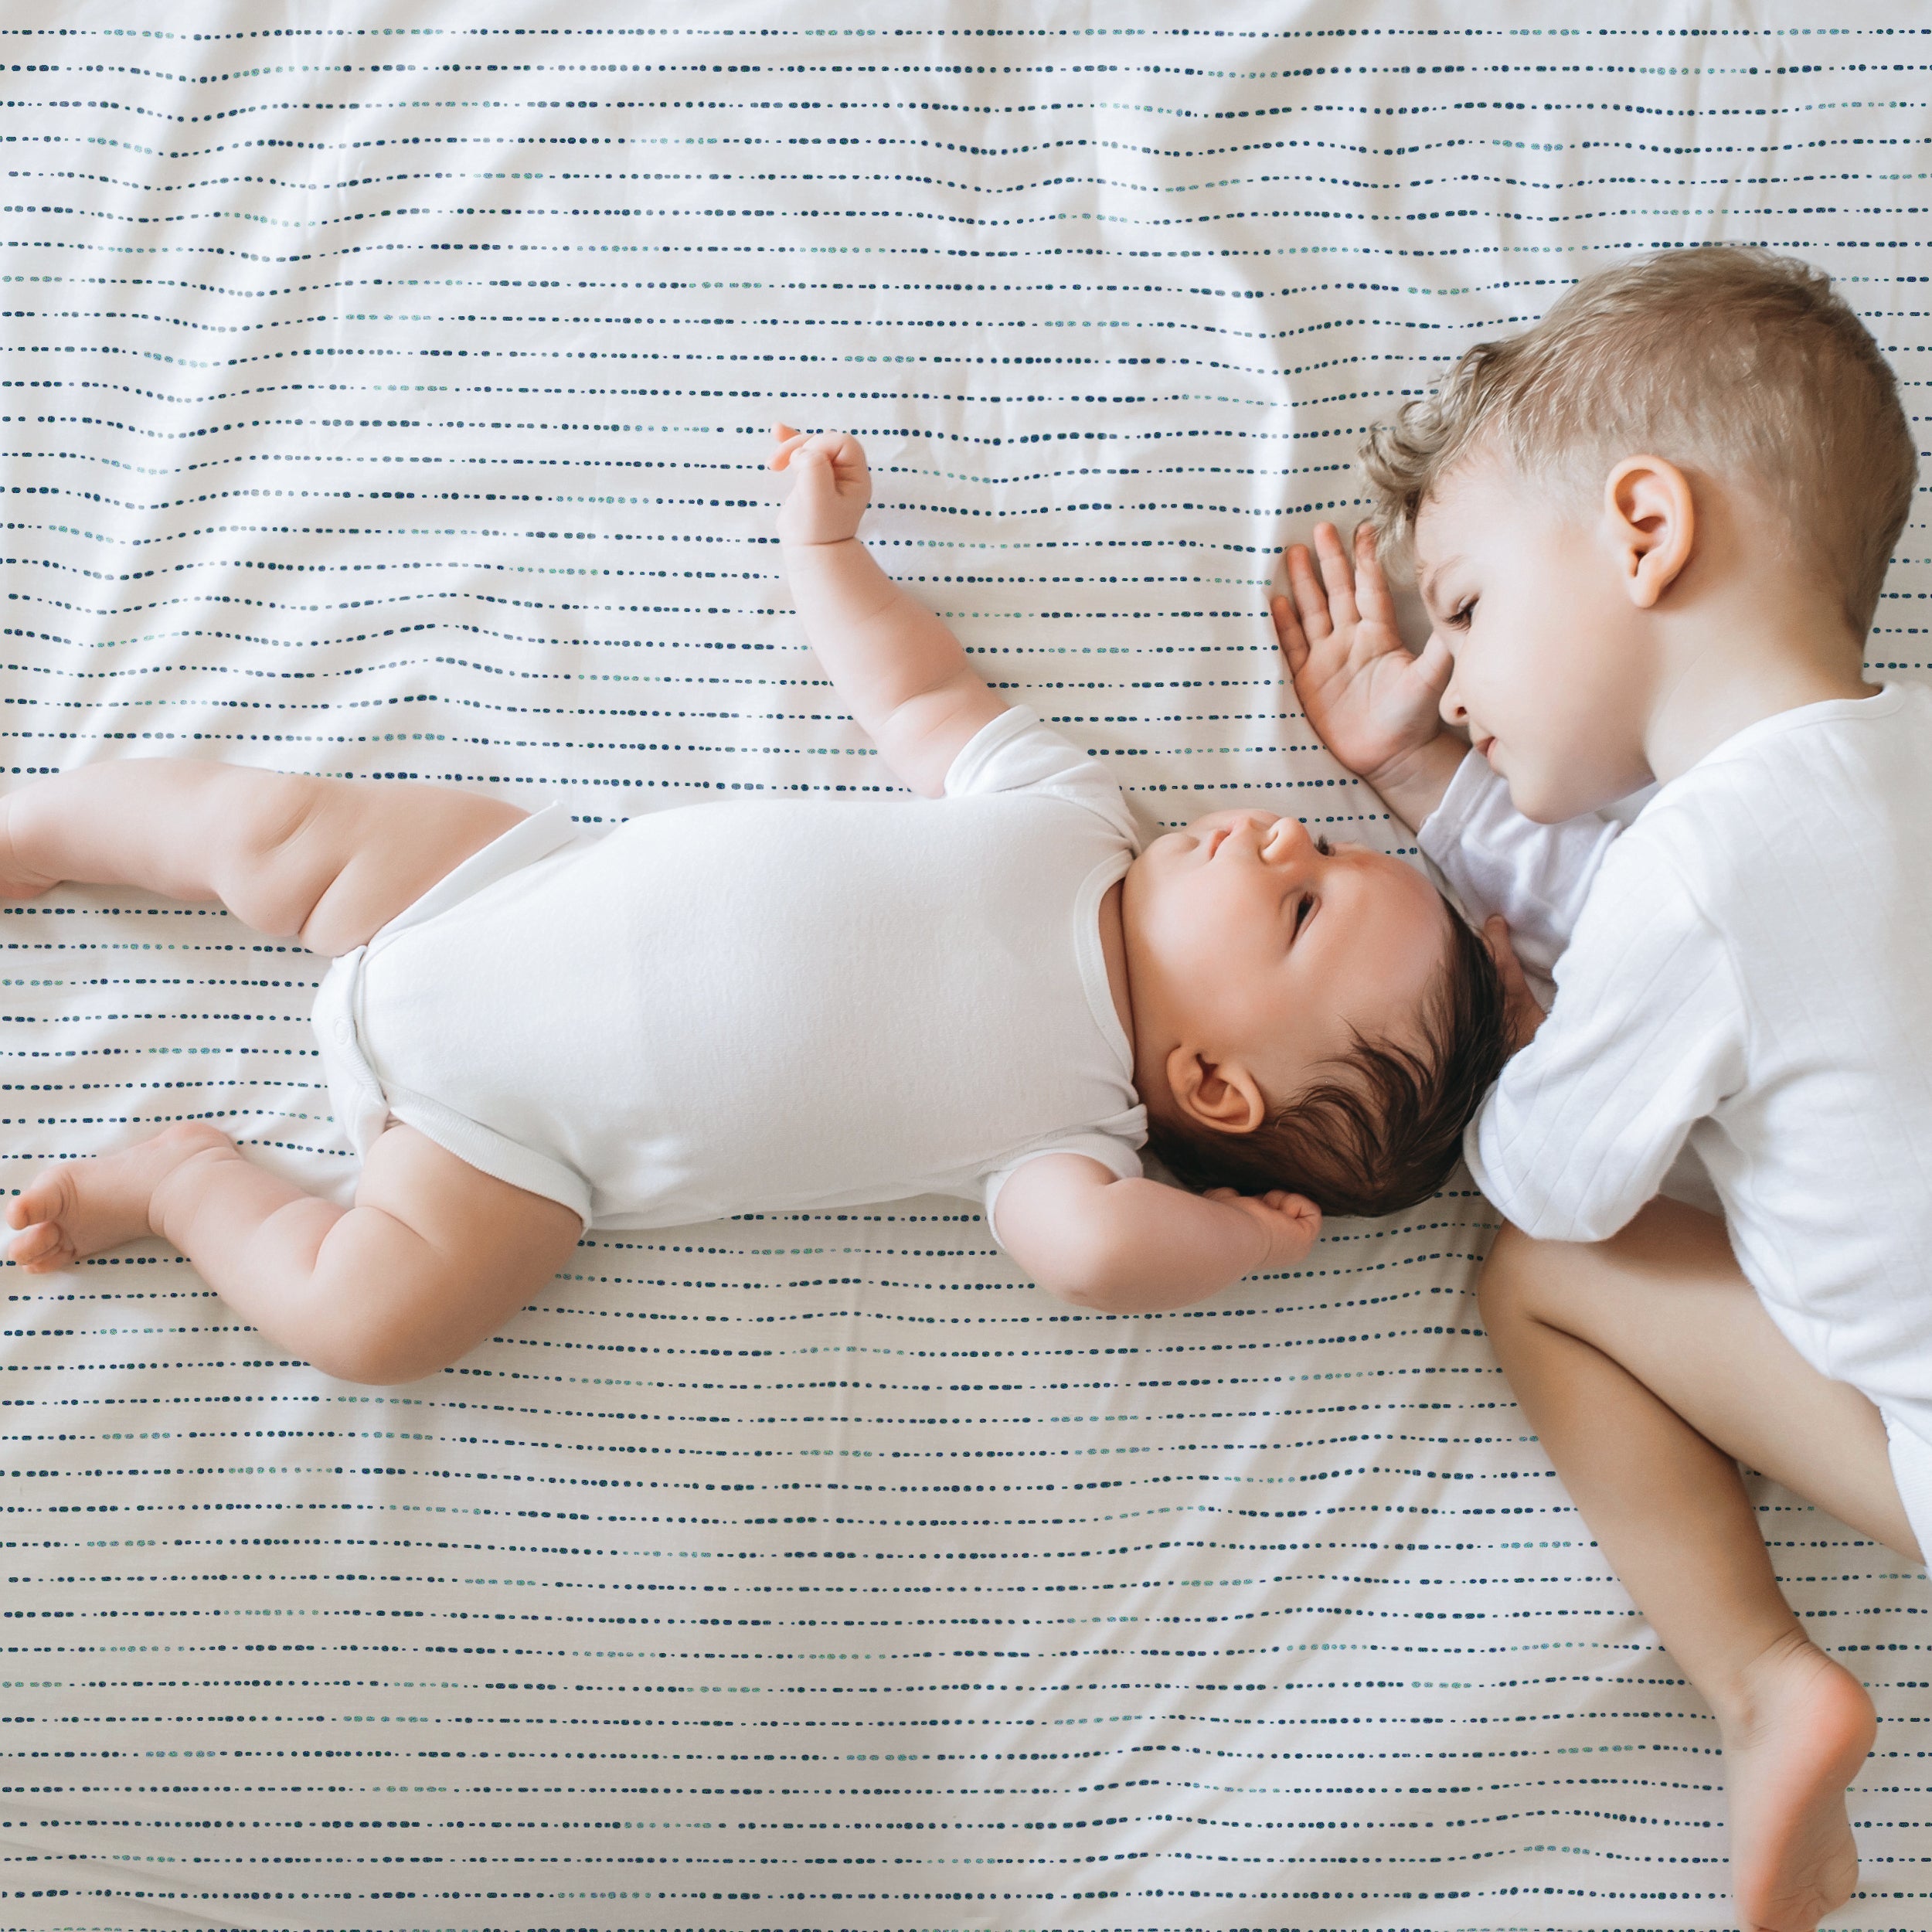 Two young children lying on a Makemake Organics Organic Cotton Sheet Set - Pebble. the older child, wearing a white shirt, gently touches the younger child's head, who is in a white onesie, stretching an arm out.